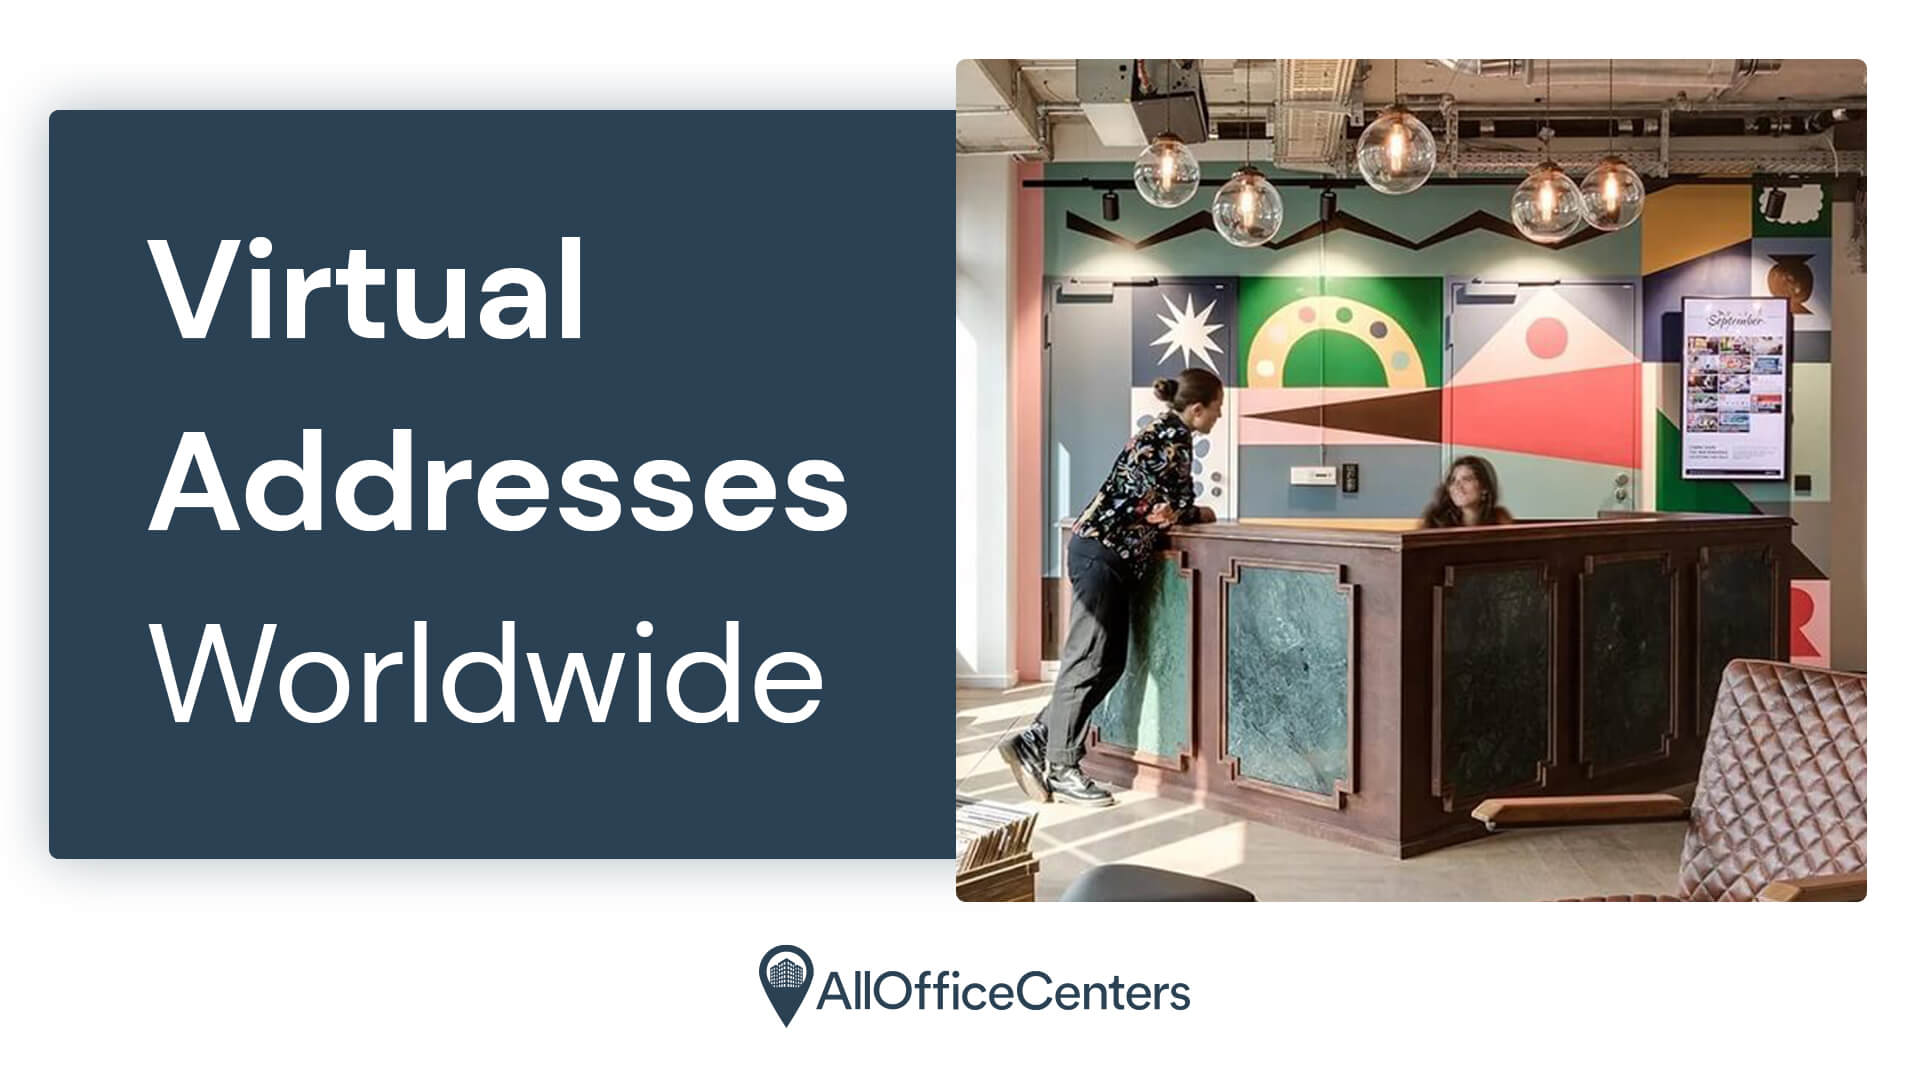 Virtual Office Solutions in Top Global Locations | AllOfficeCenters